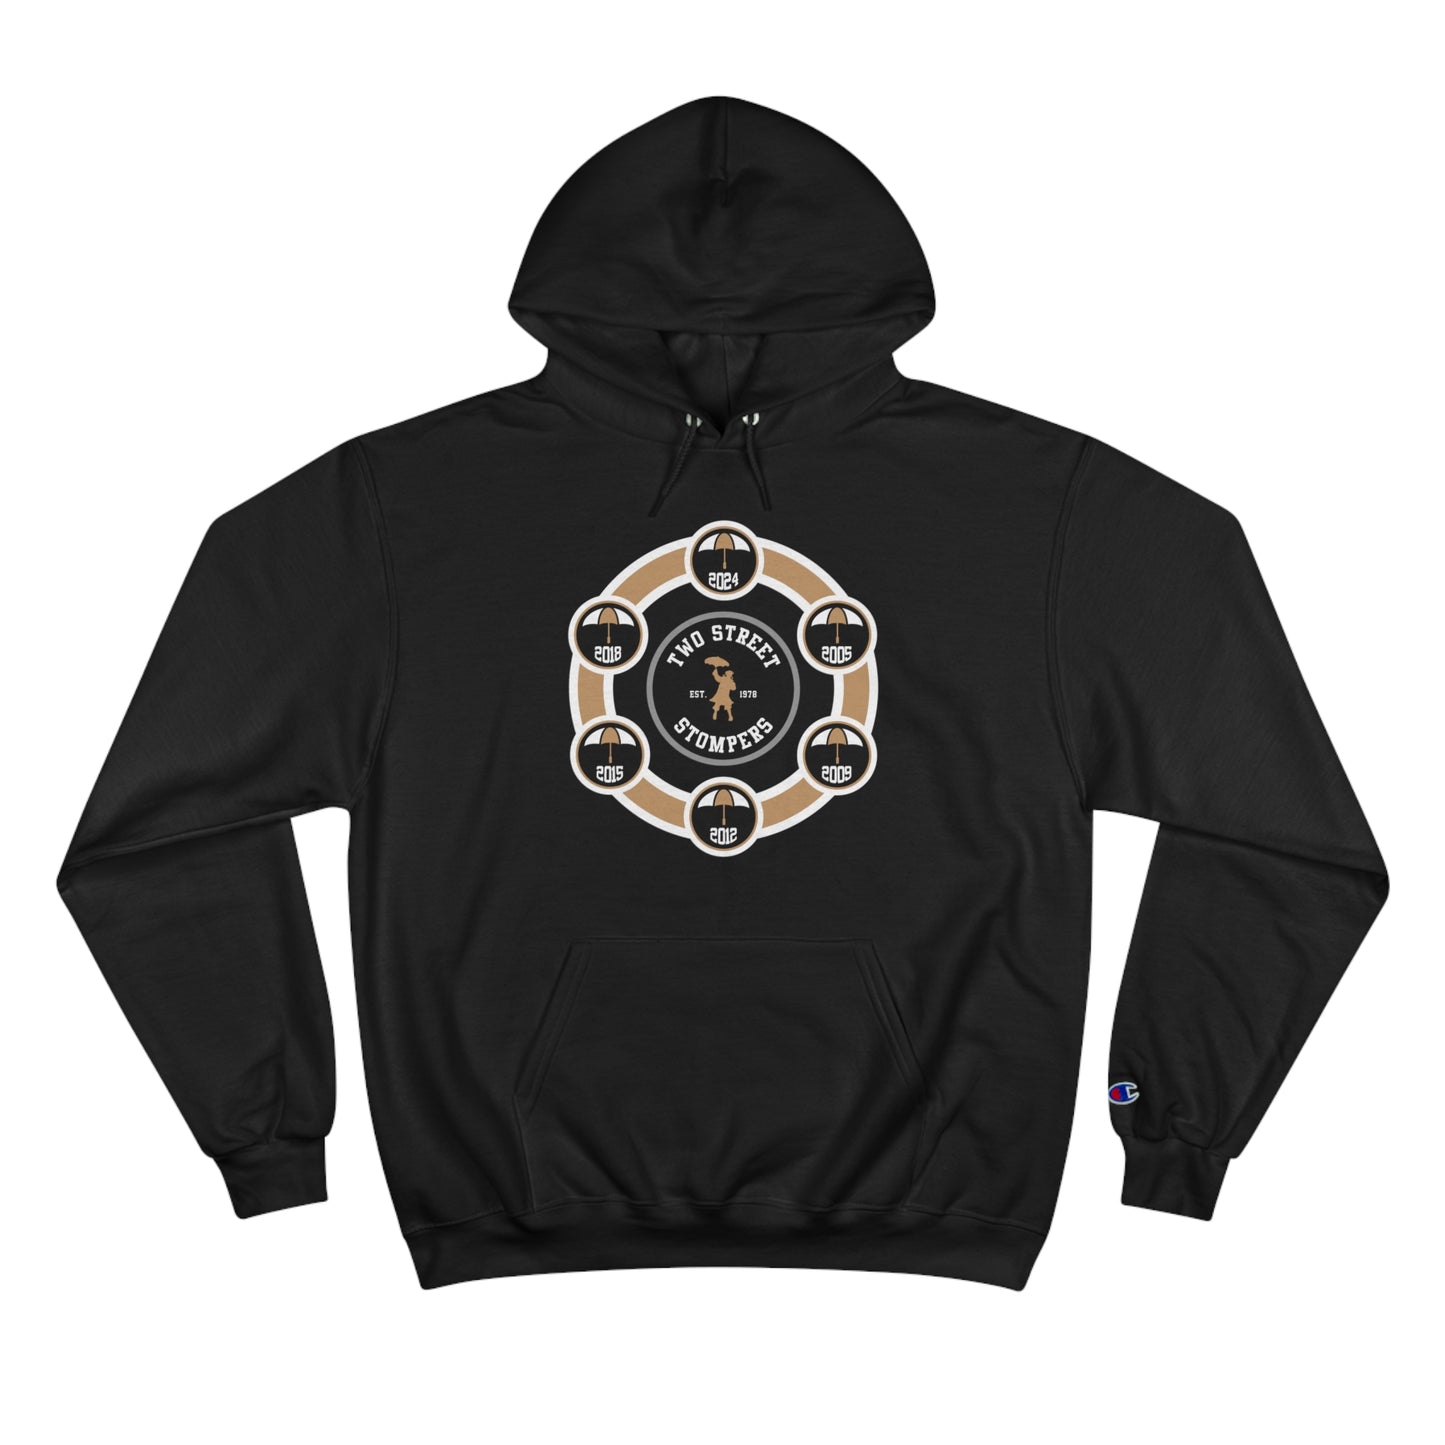 Two Street Stompers Championship Crest Hoodie